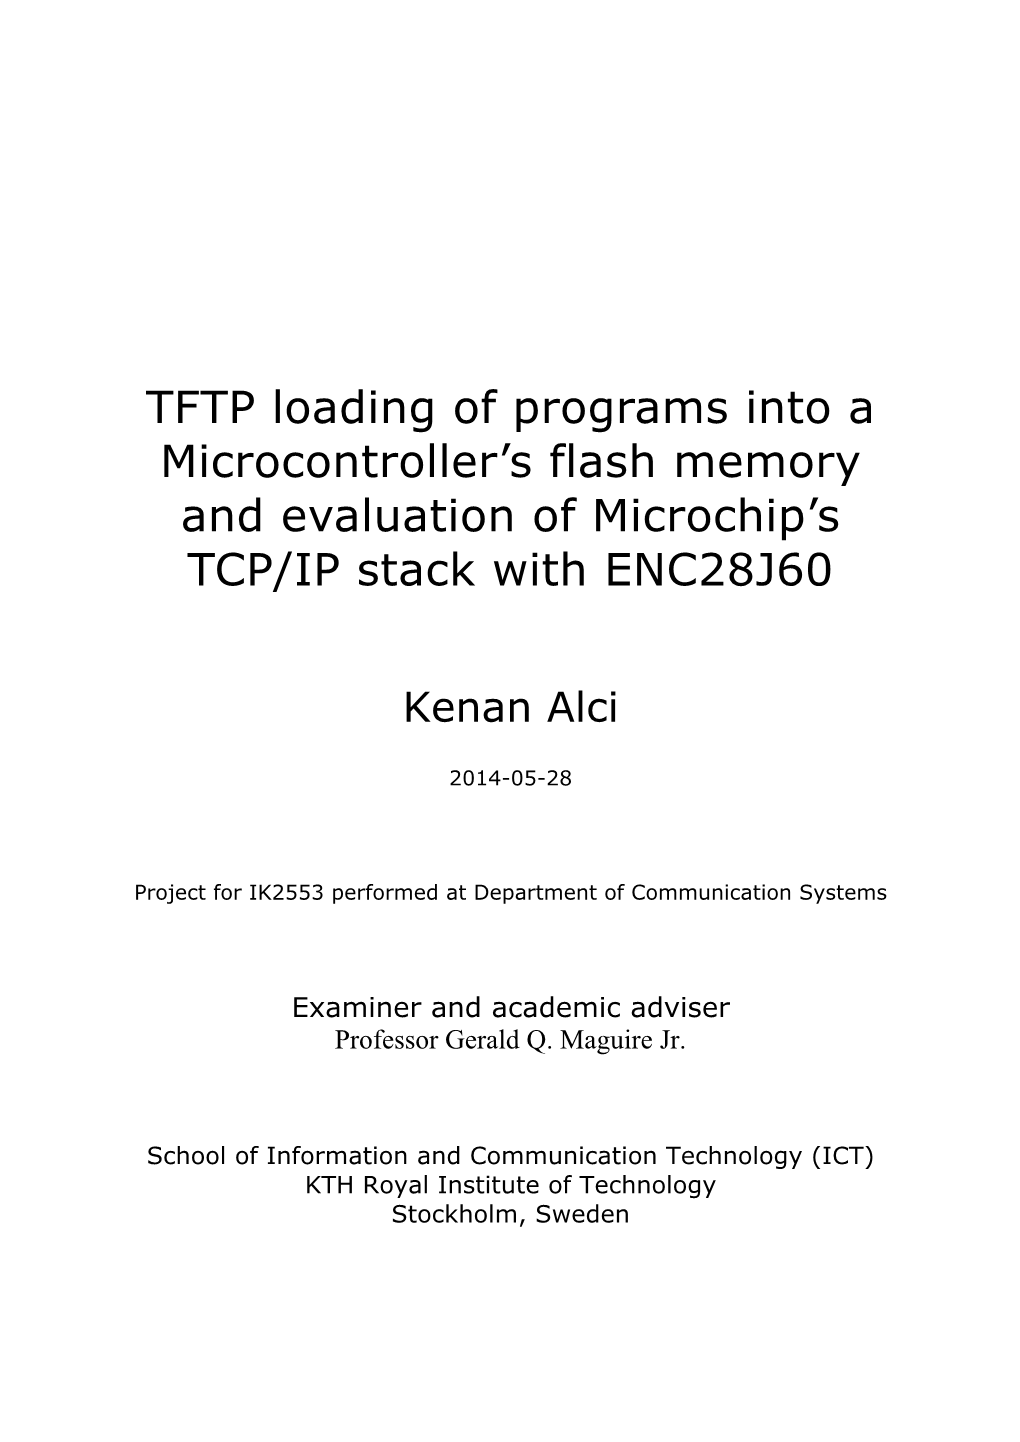 TFTP Loading of Programs Into a Microcontroller's Flash Memory And